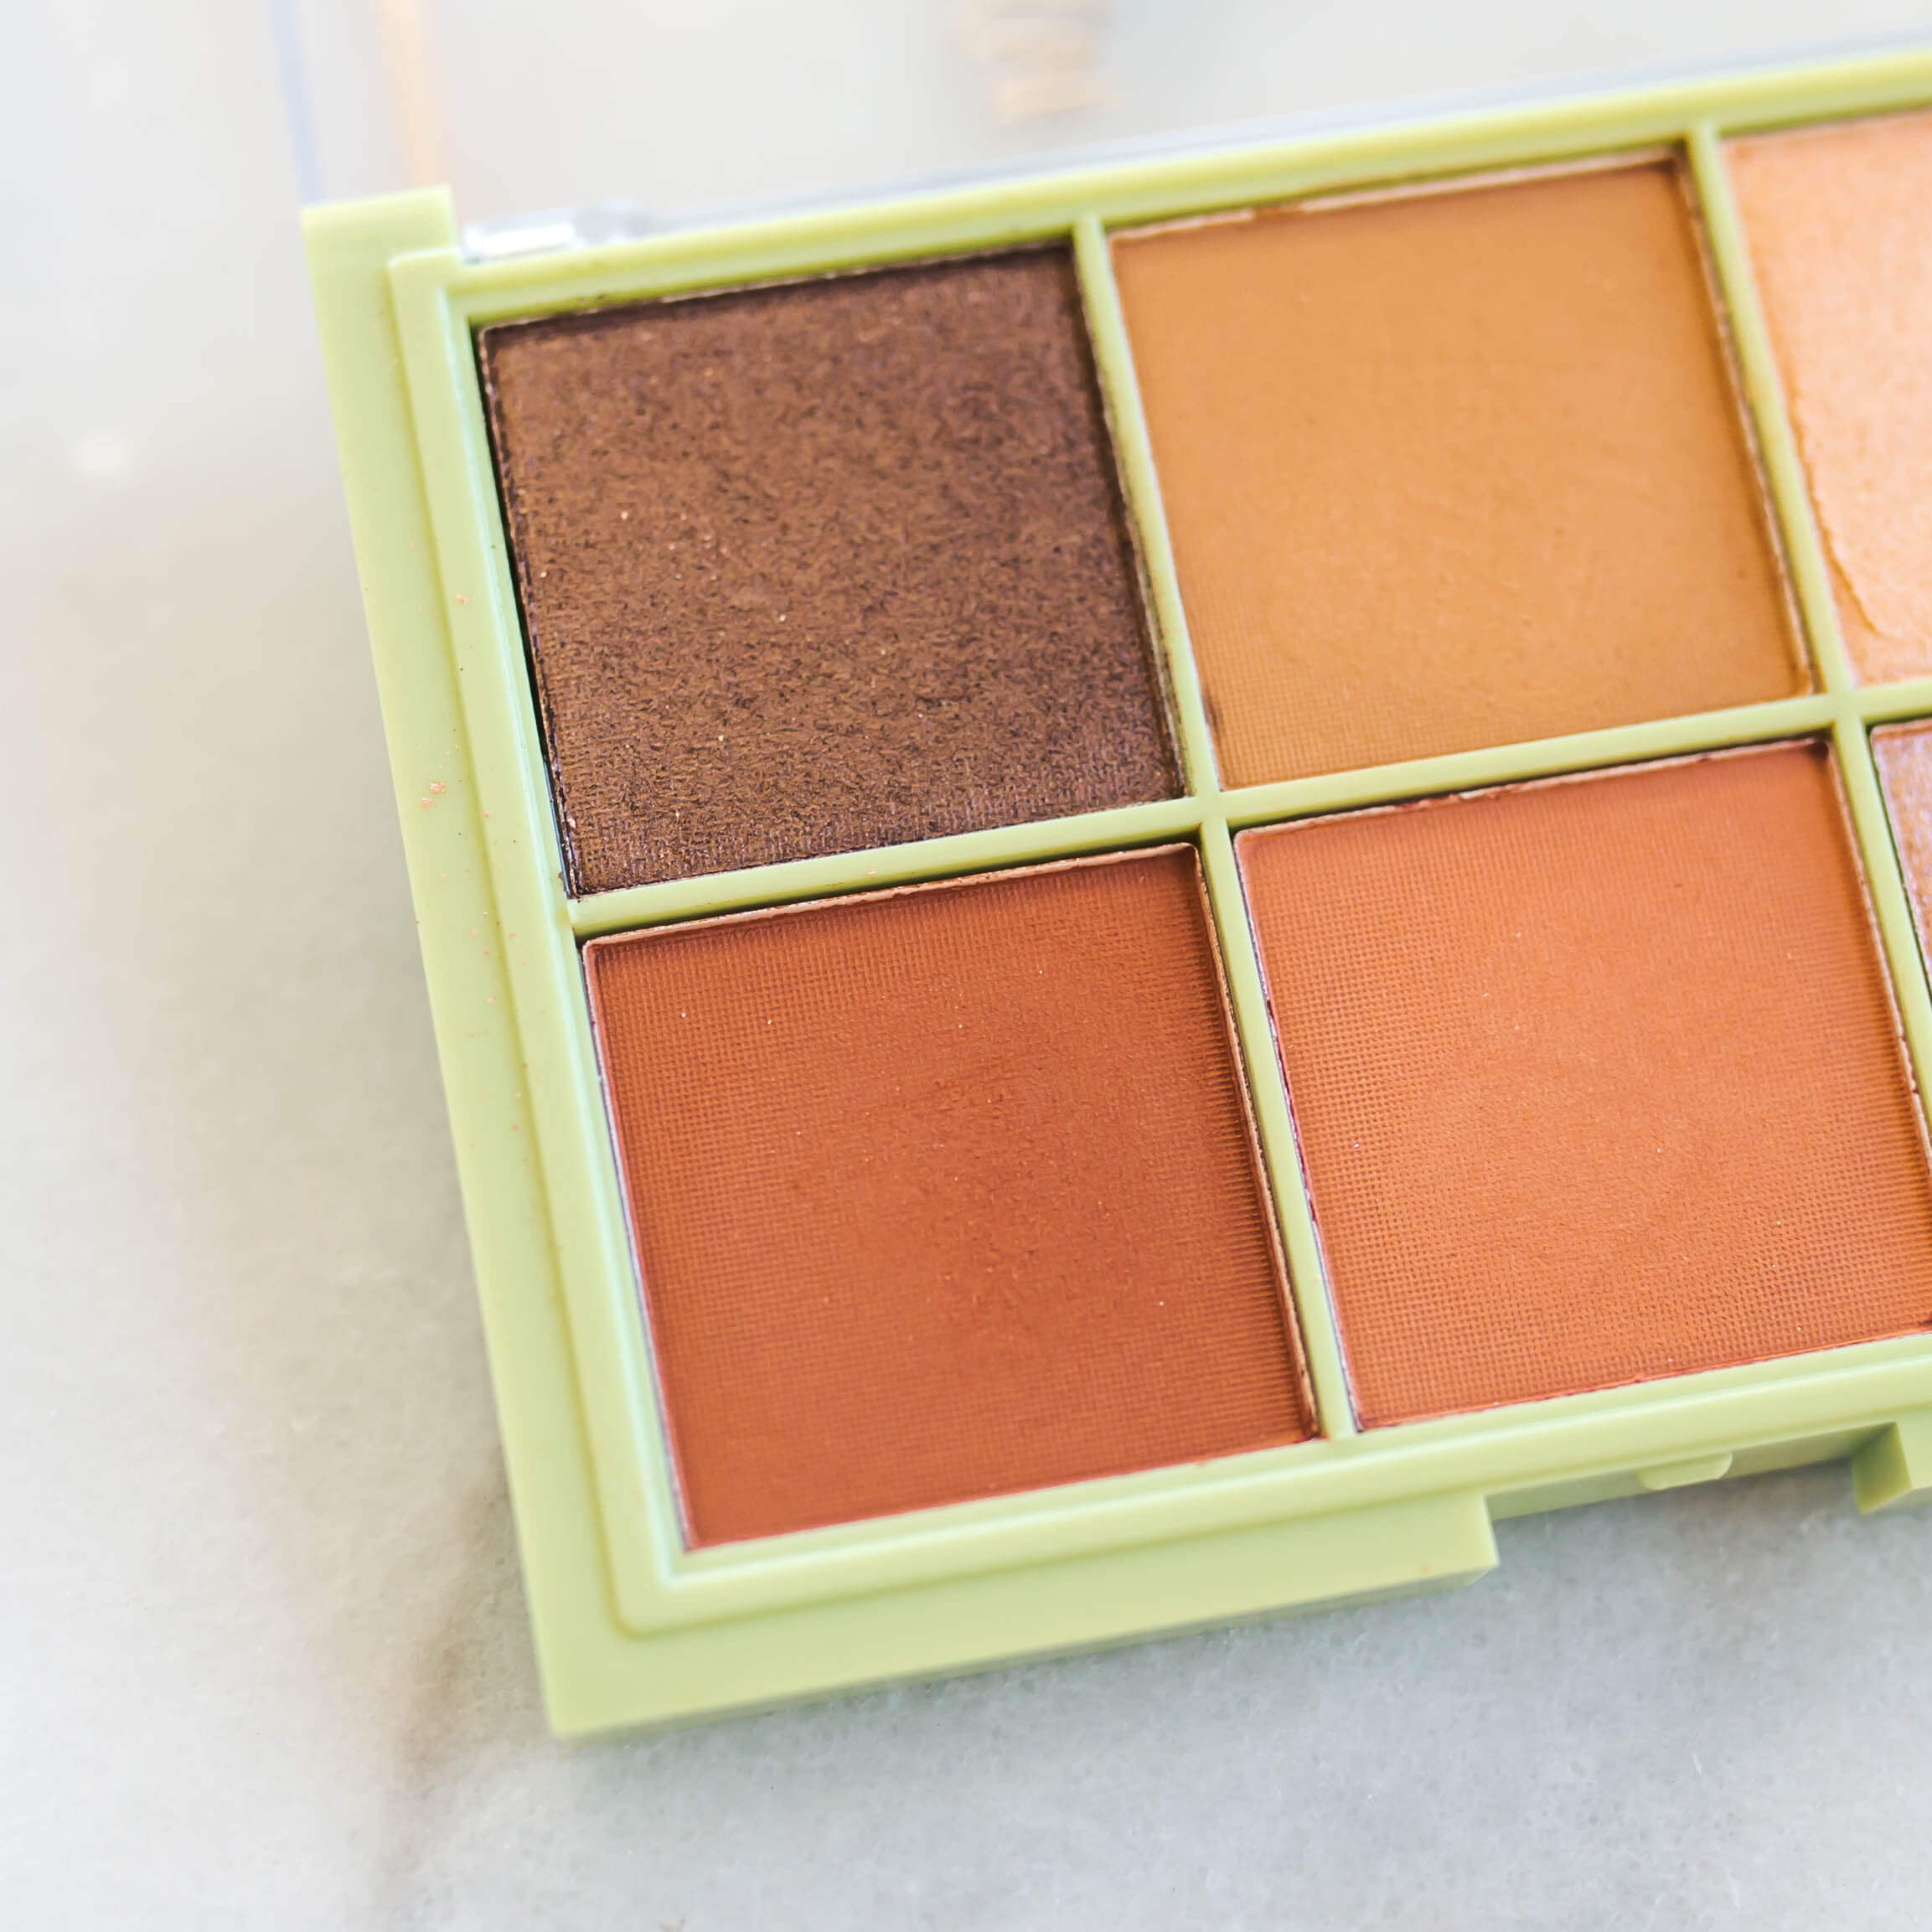 Pixi Beauty Let's Talk Eyeshadow Palette Review + Swatches | Twinspiration